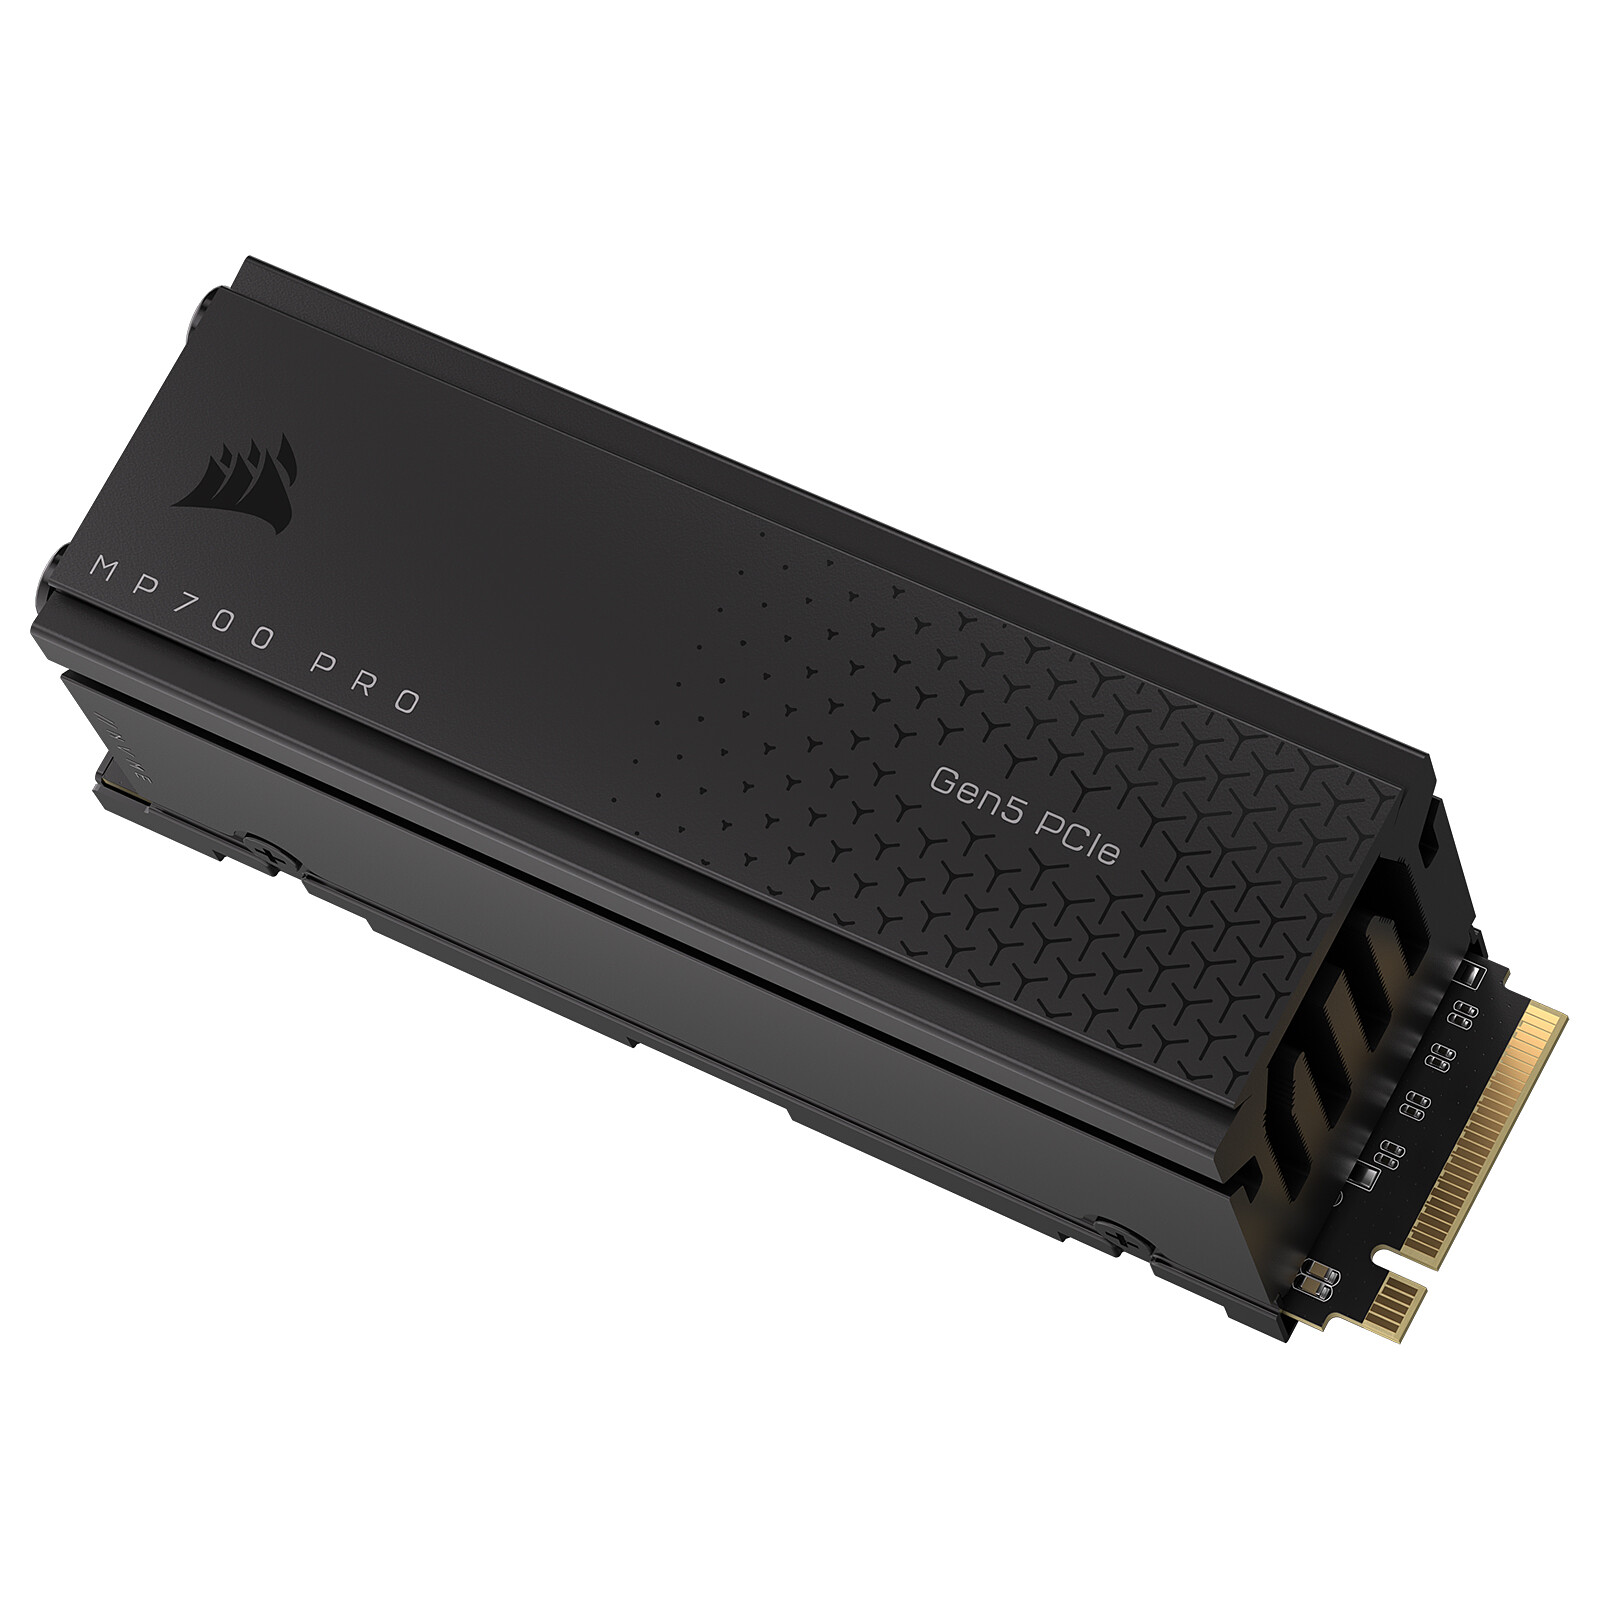 Samsung SSD 990 PRO M.2 PCIe NVMe 2 To - Disque SSD - LDLC